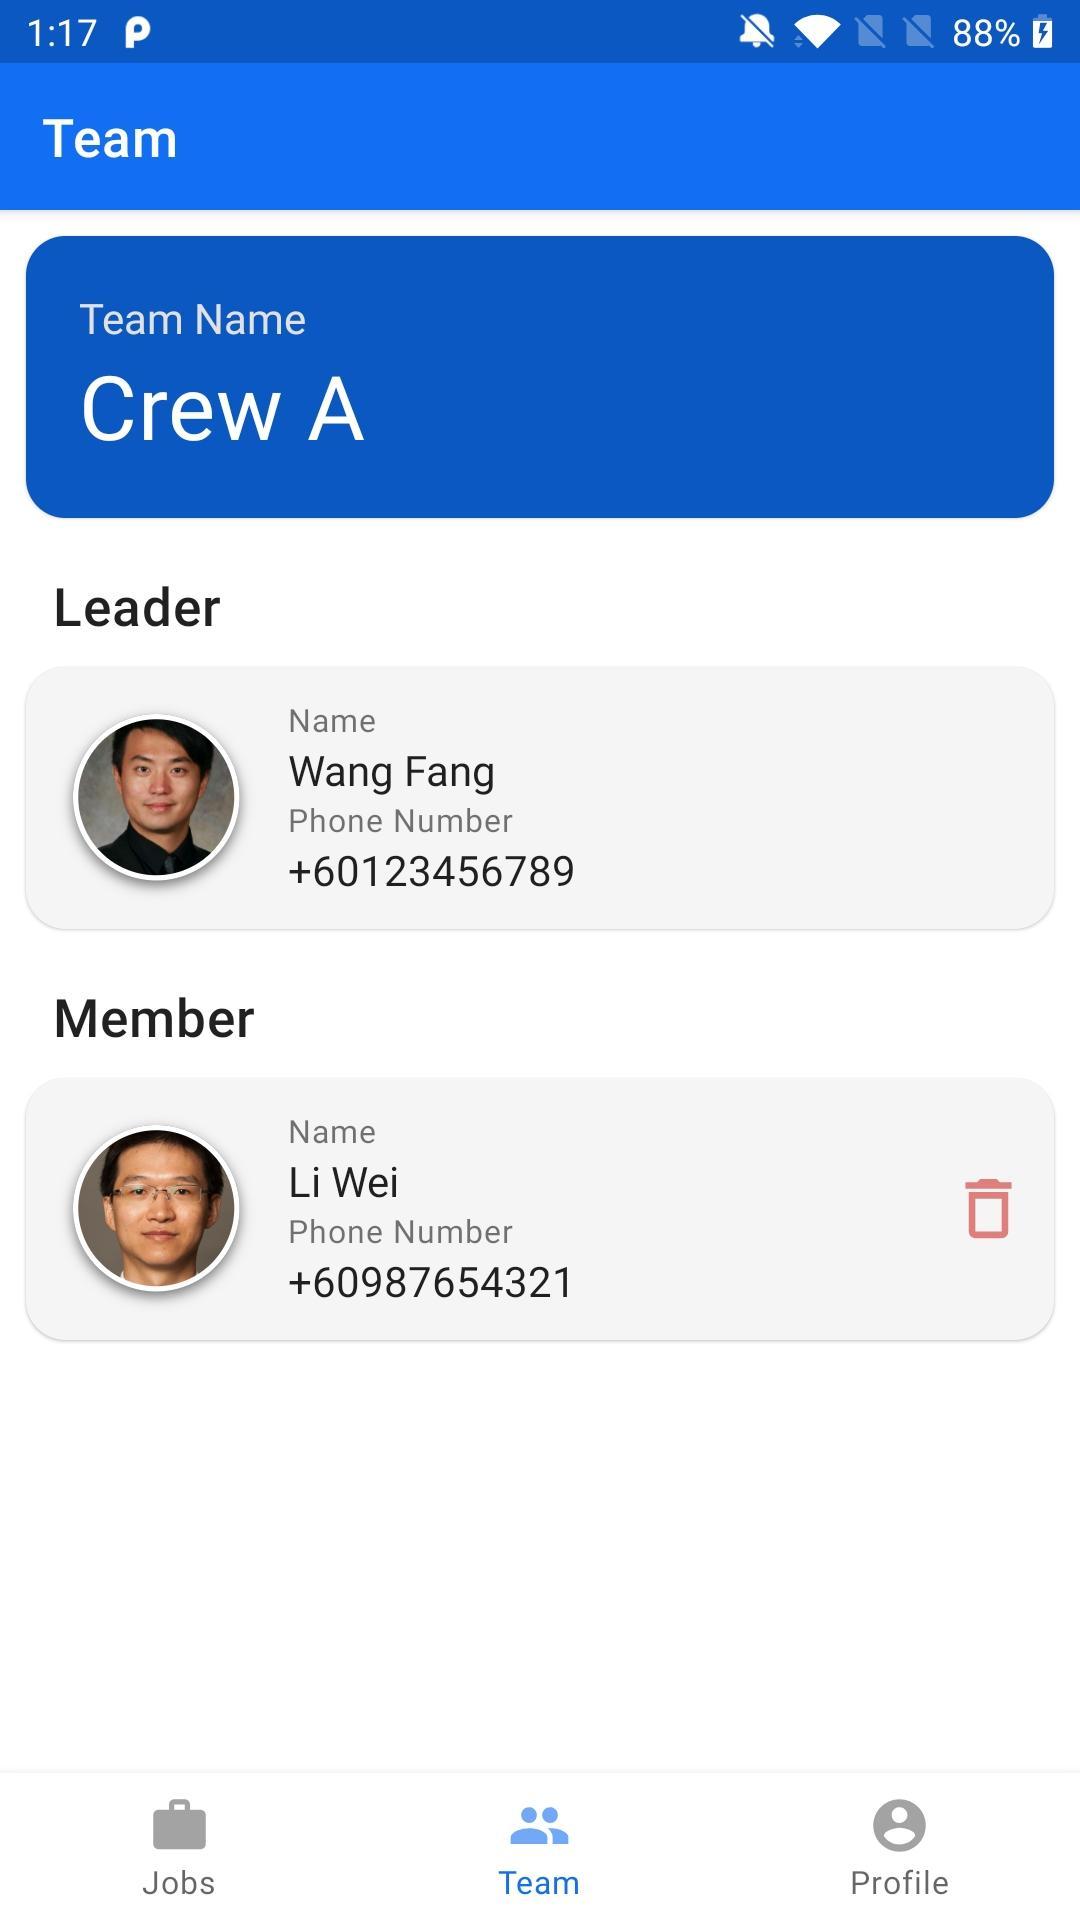 ANG Family Home Services - Crew 1.0.6 Screenshot 5